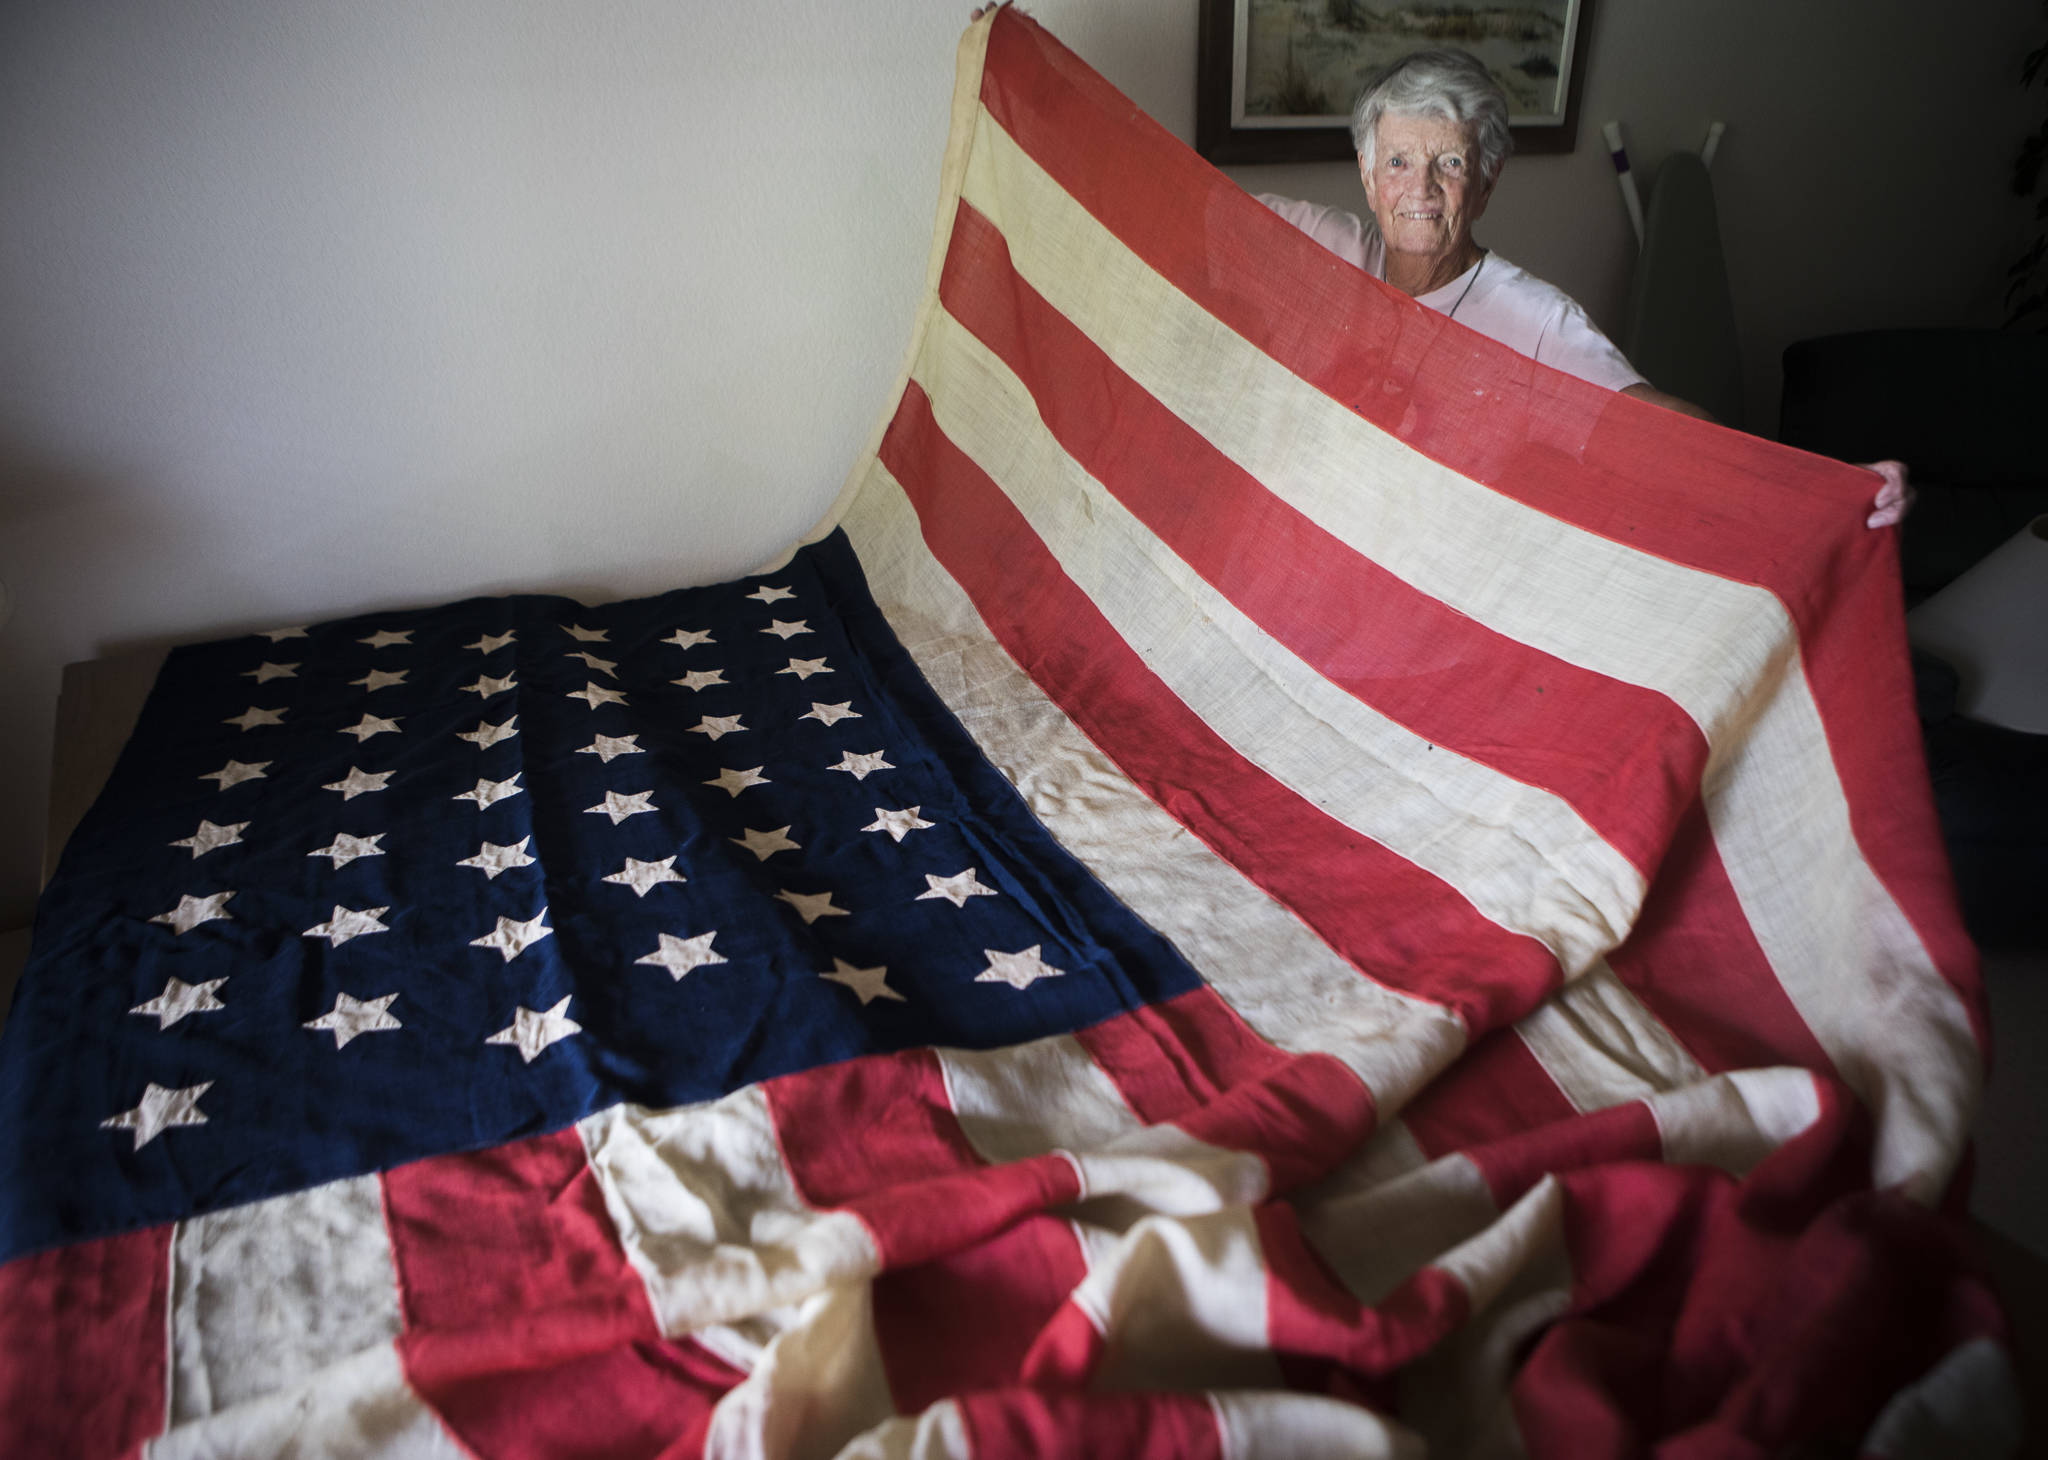 Pat Colyer with her 44-star American flag at her home Thursday in Mukilteo. (Olivia Vanni / The Herald)